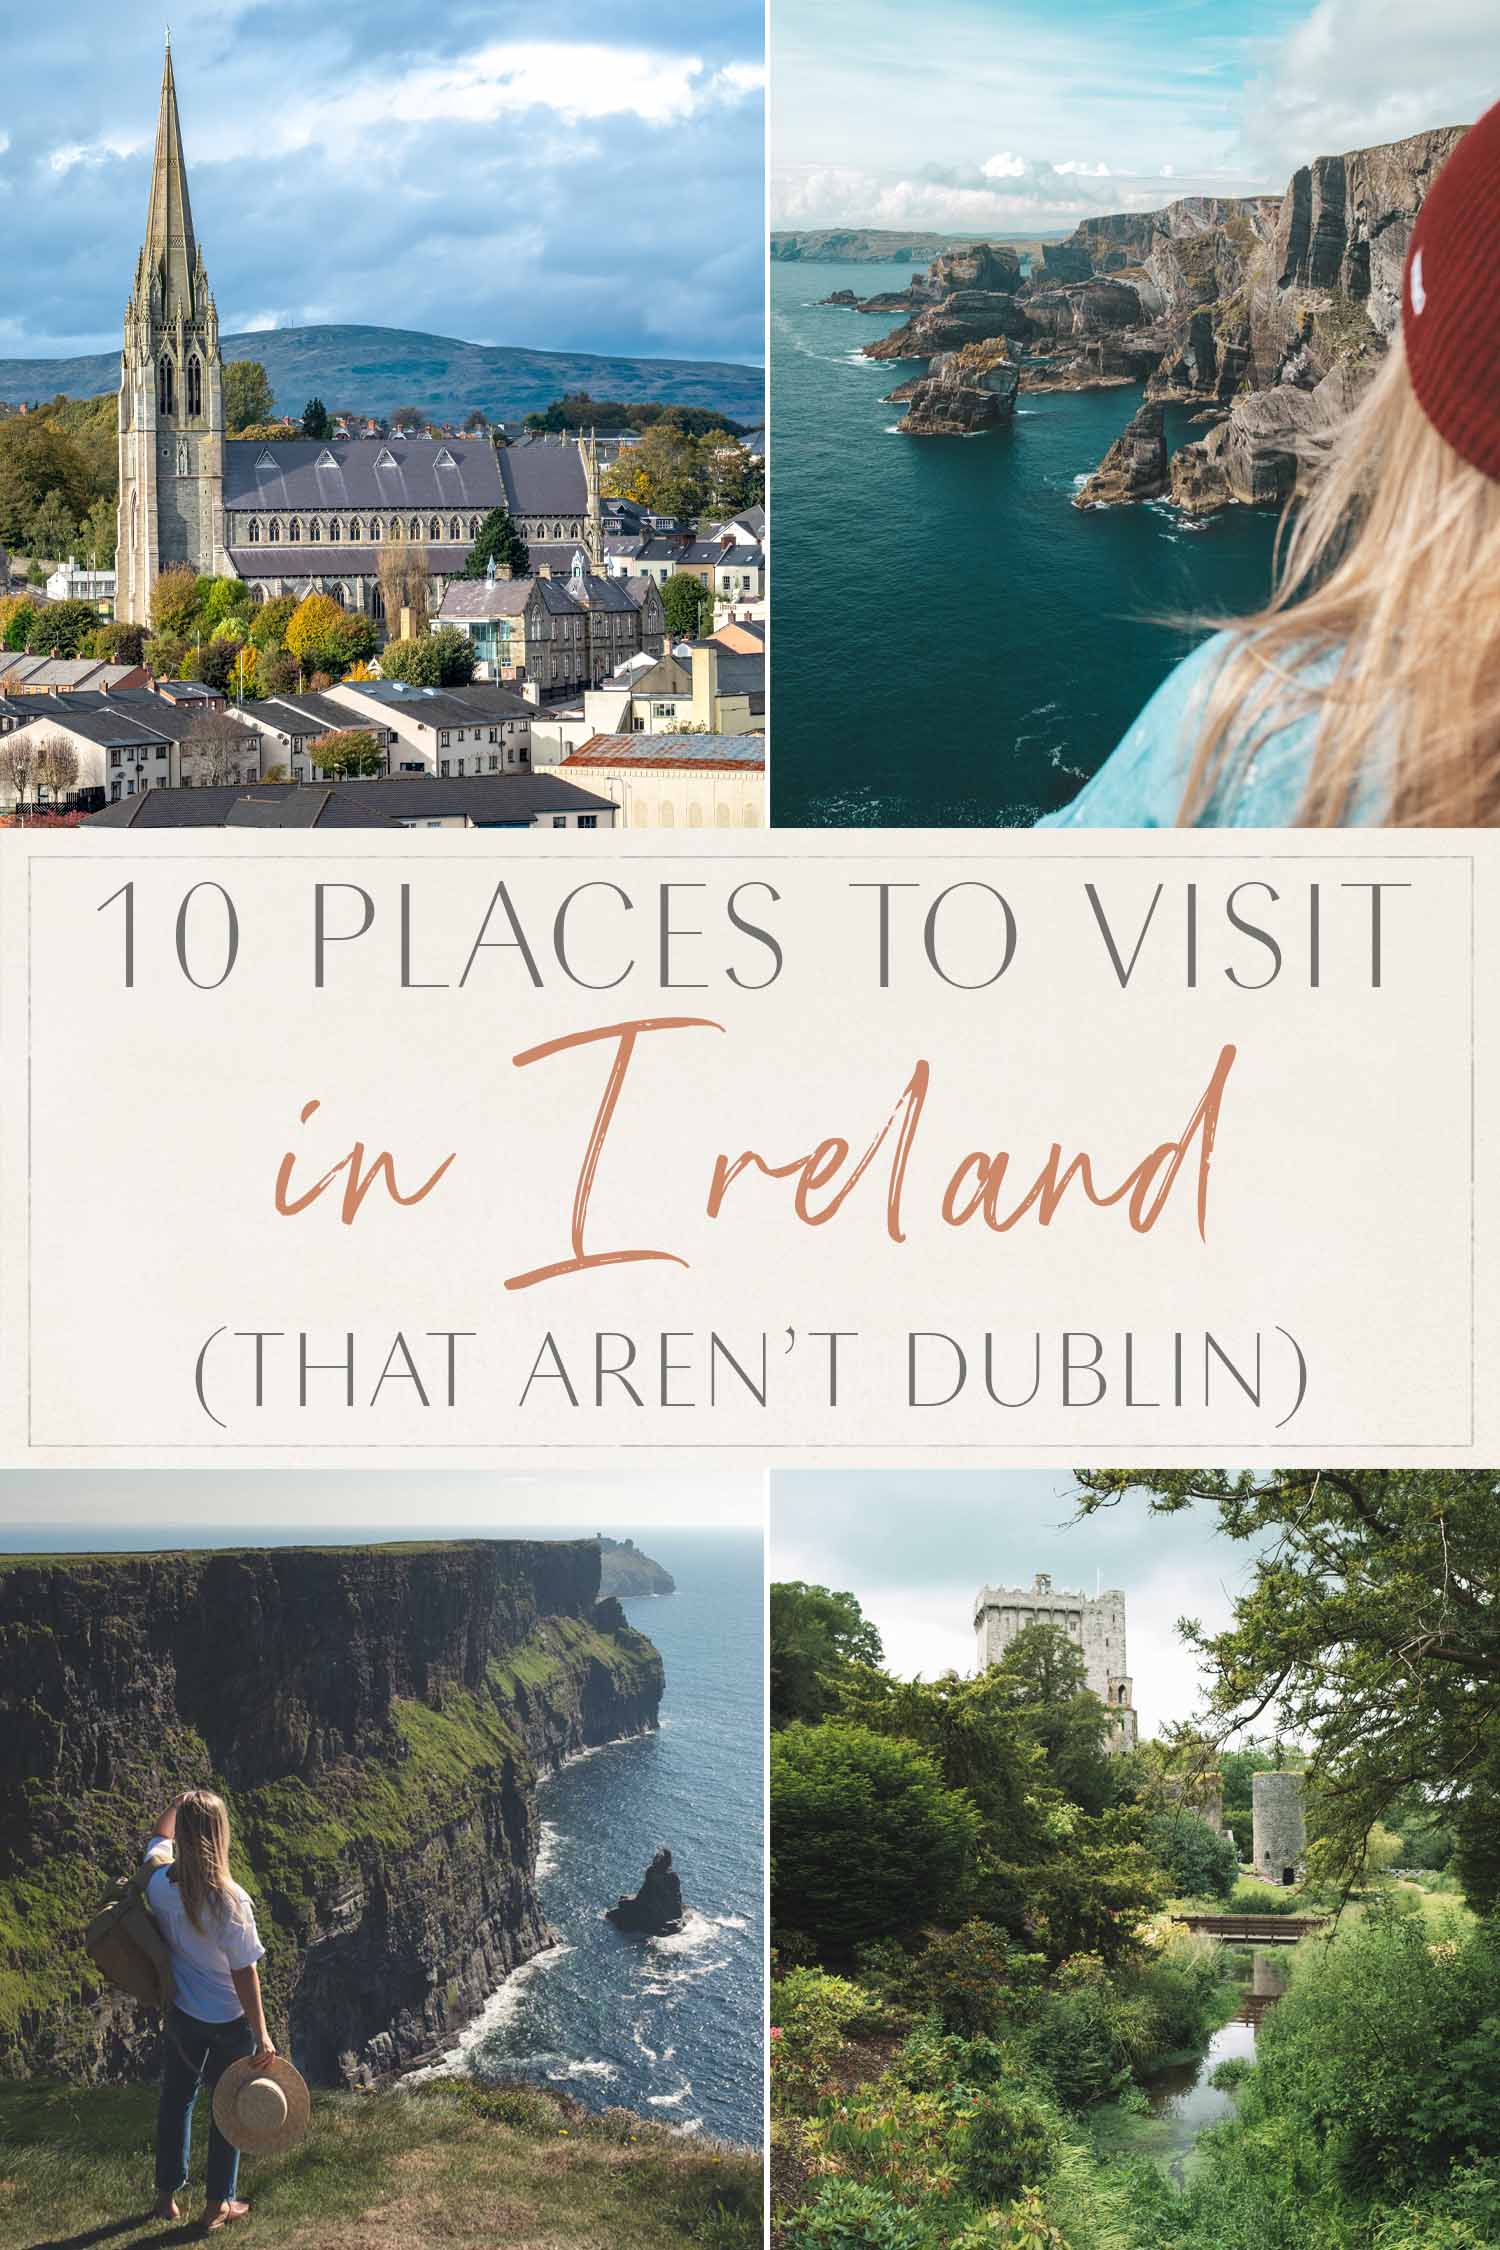 10 Places to Visit Ireland